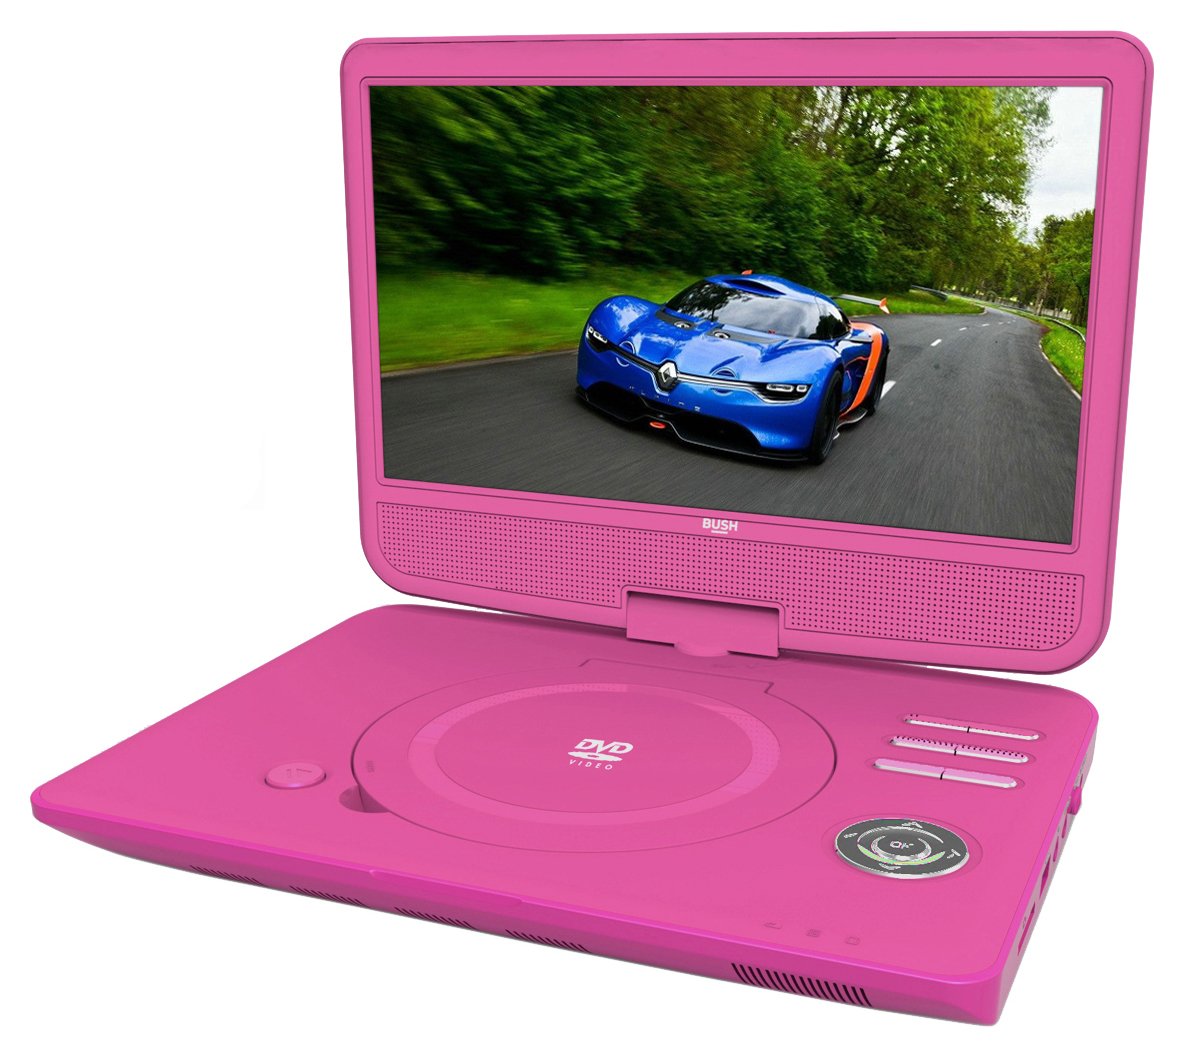 Bush 10 Inch Portable In - Car DVD Player - Pink 